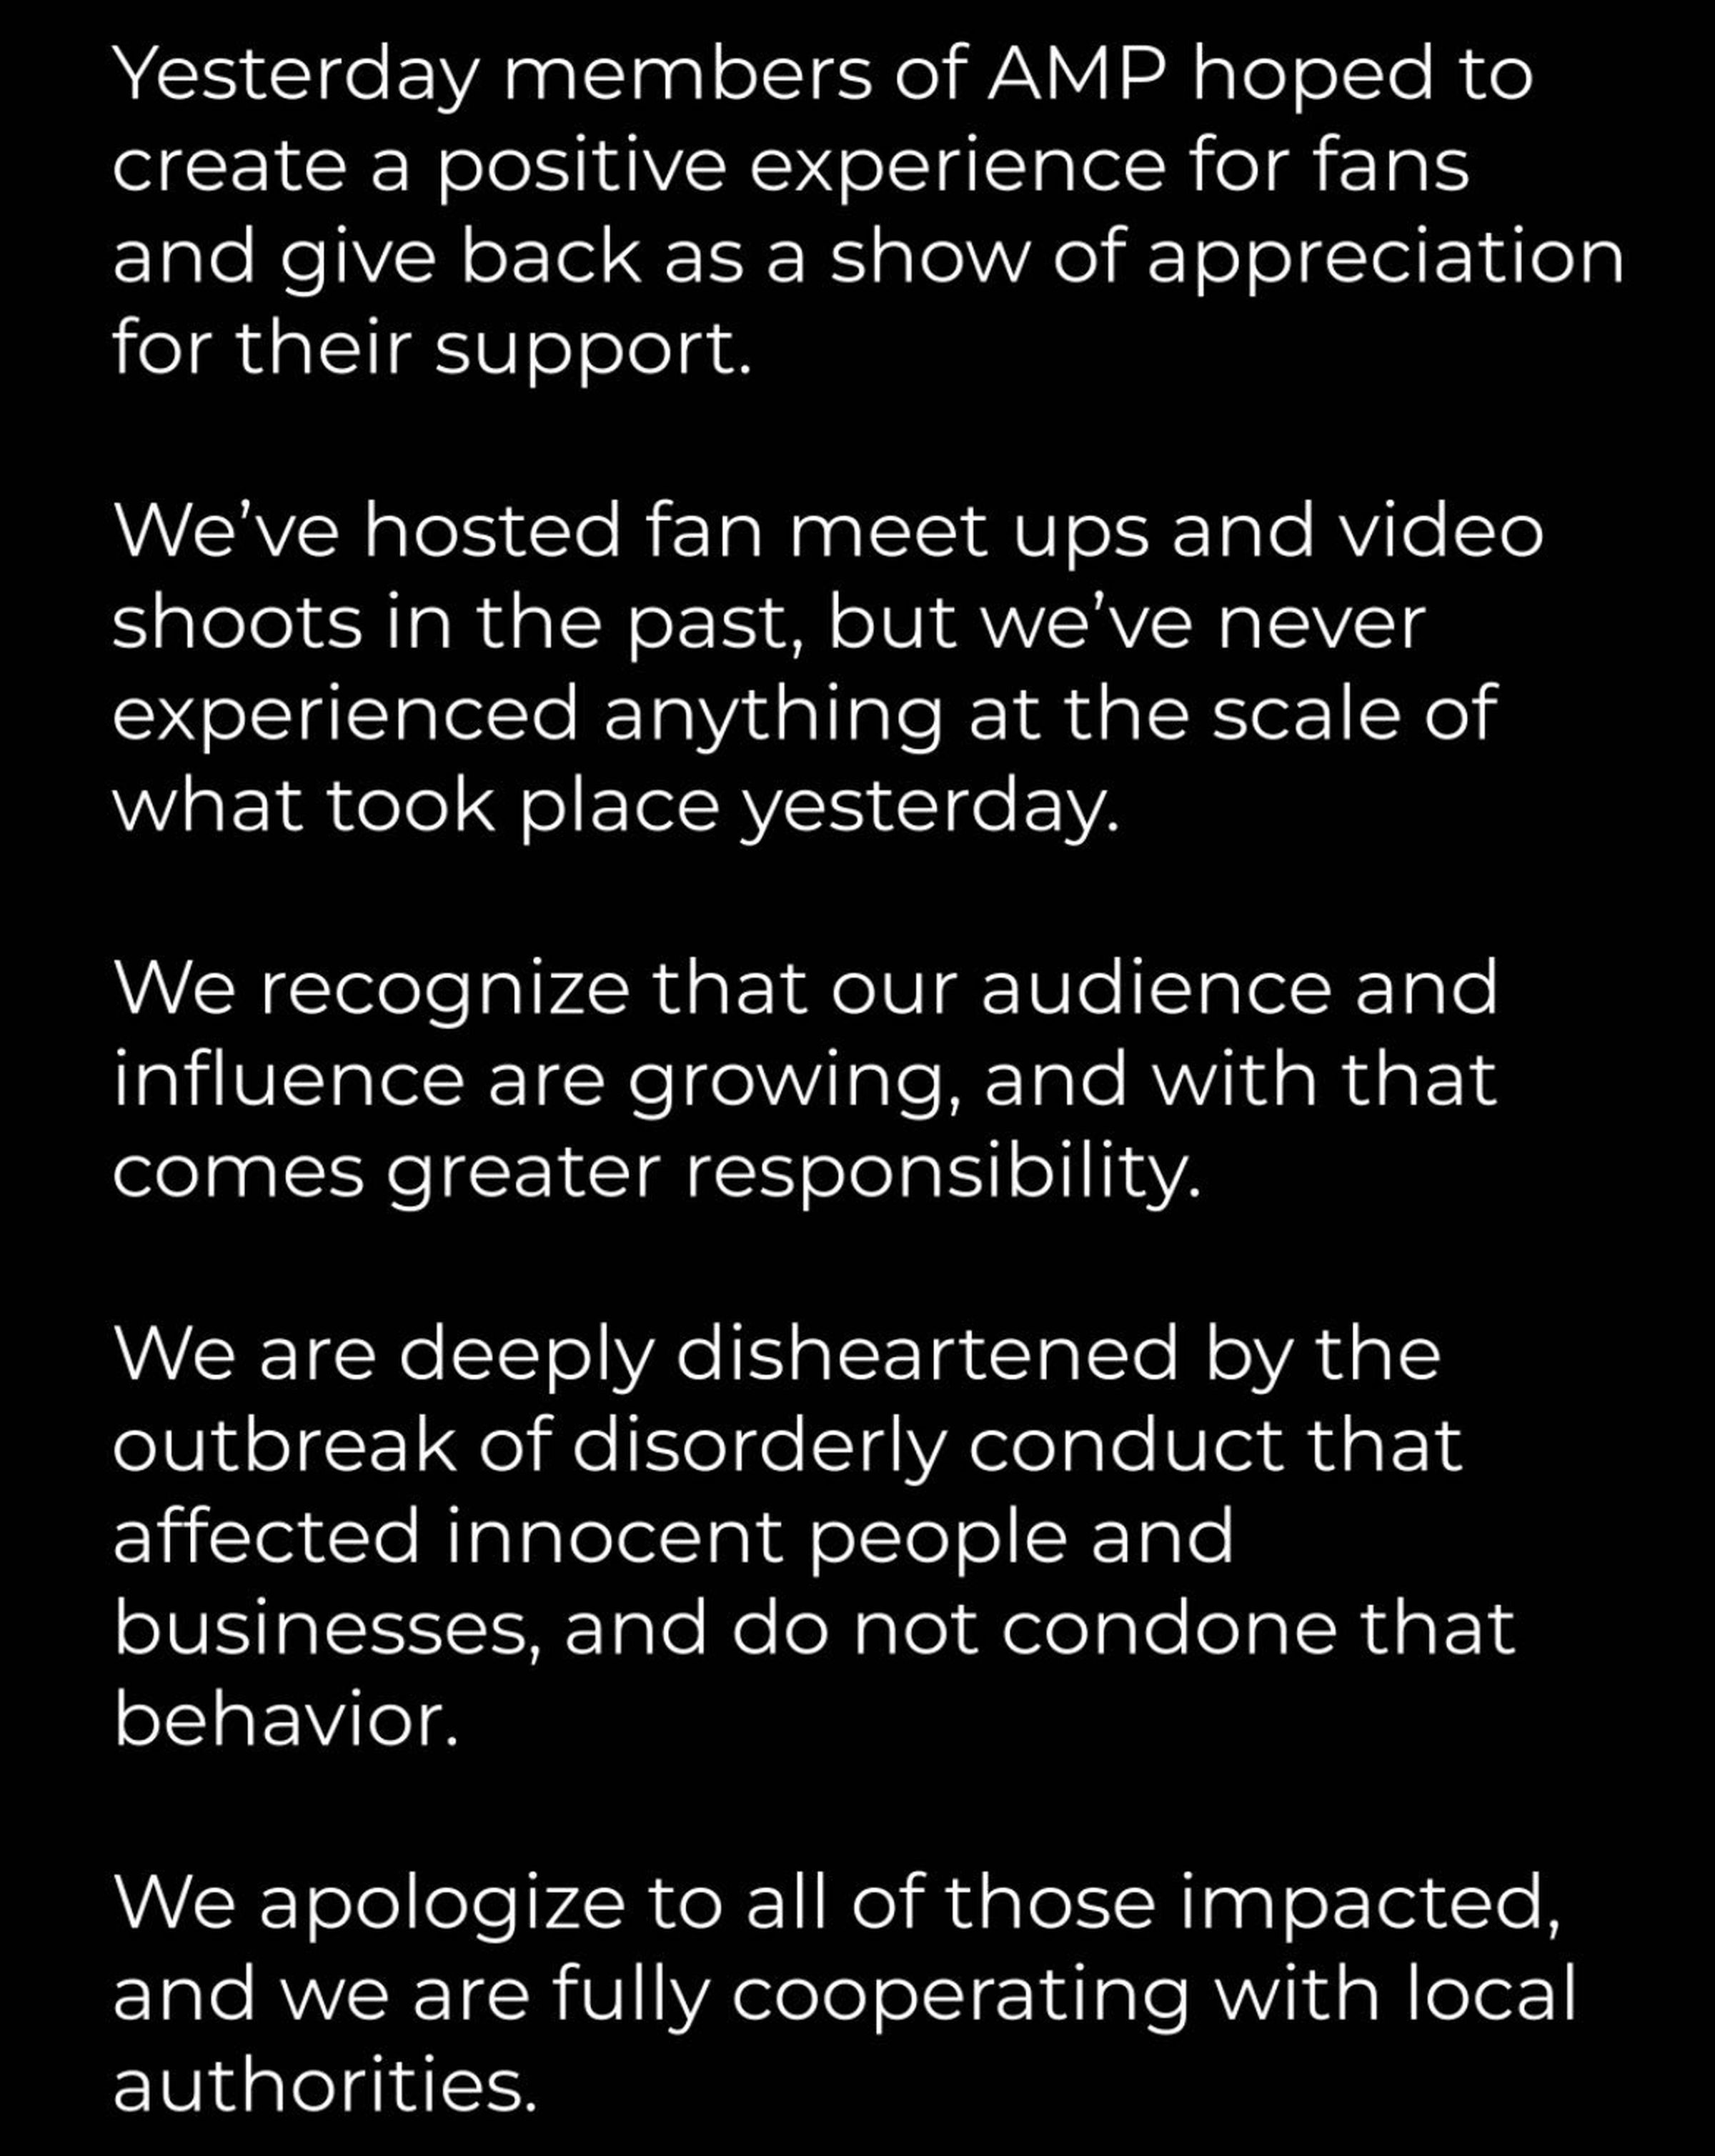 AMP statement: Yesterday members of AMP hoped to create a positing experience for fans and give back as a show of appreciation for their support....We are deeply disheartened by the outbreak of disorderly conduct that affected innocent people and businesses and do not condone that behavior. We apologize to all of those impacted, and we are fully cooperating with local authorities.